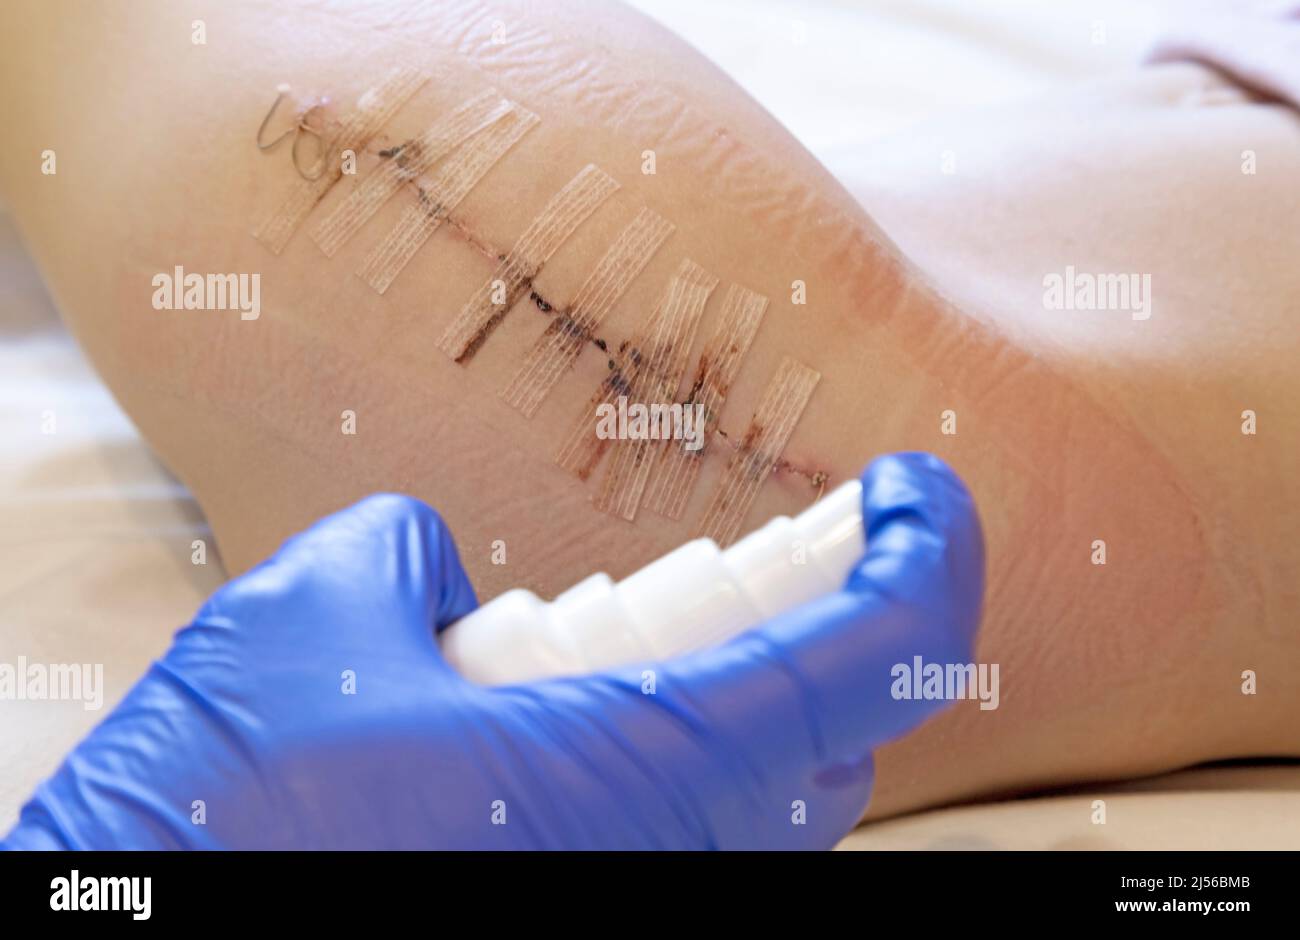 Hands of a doctor in blue gloves, a nurse or a doctor who treats the patient's wound after surgery and disinfects with antibacterial spray to clean Stock Photo